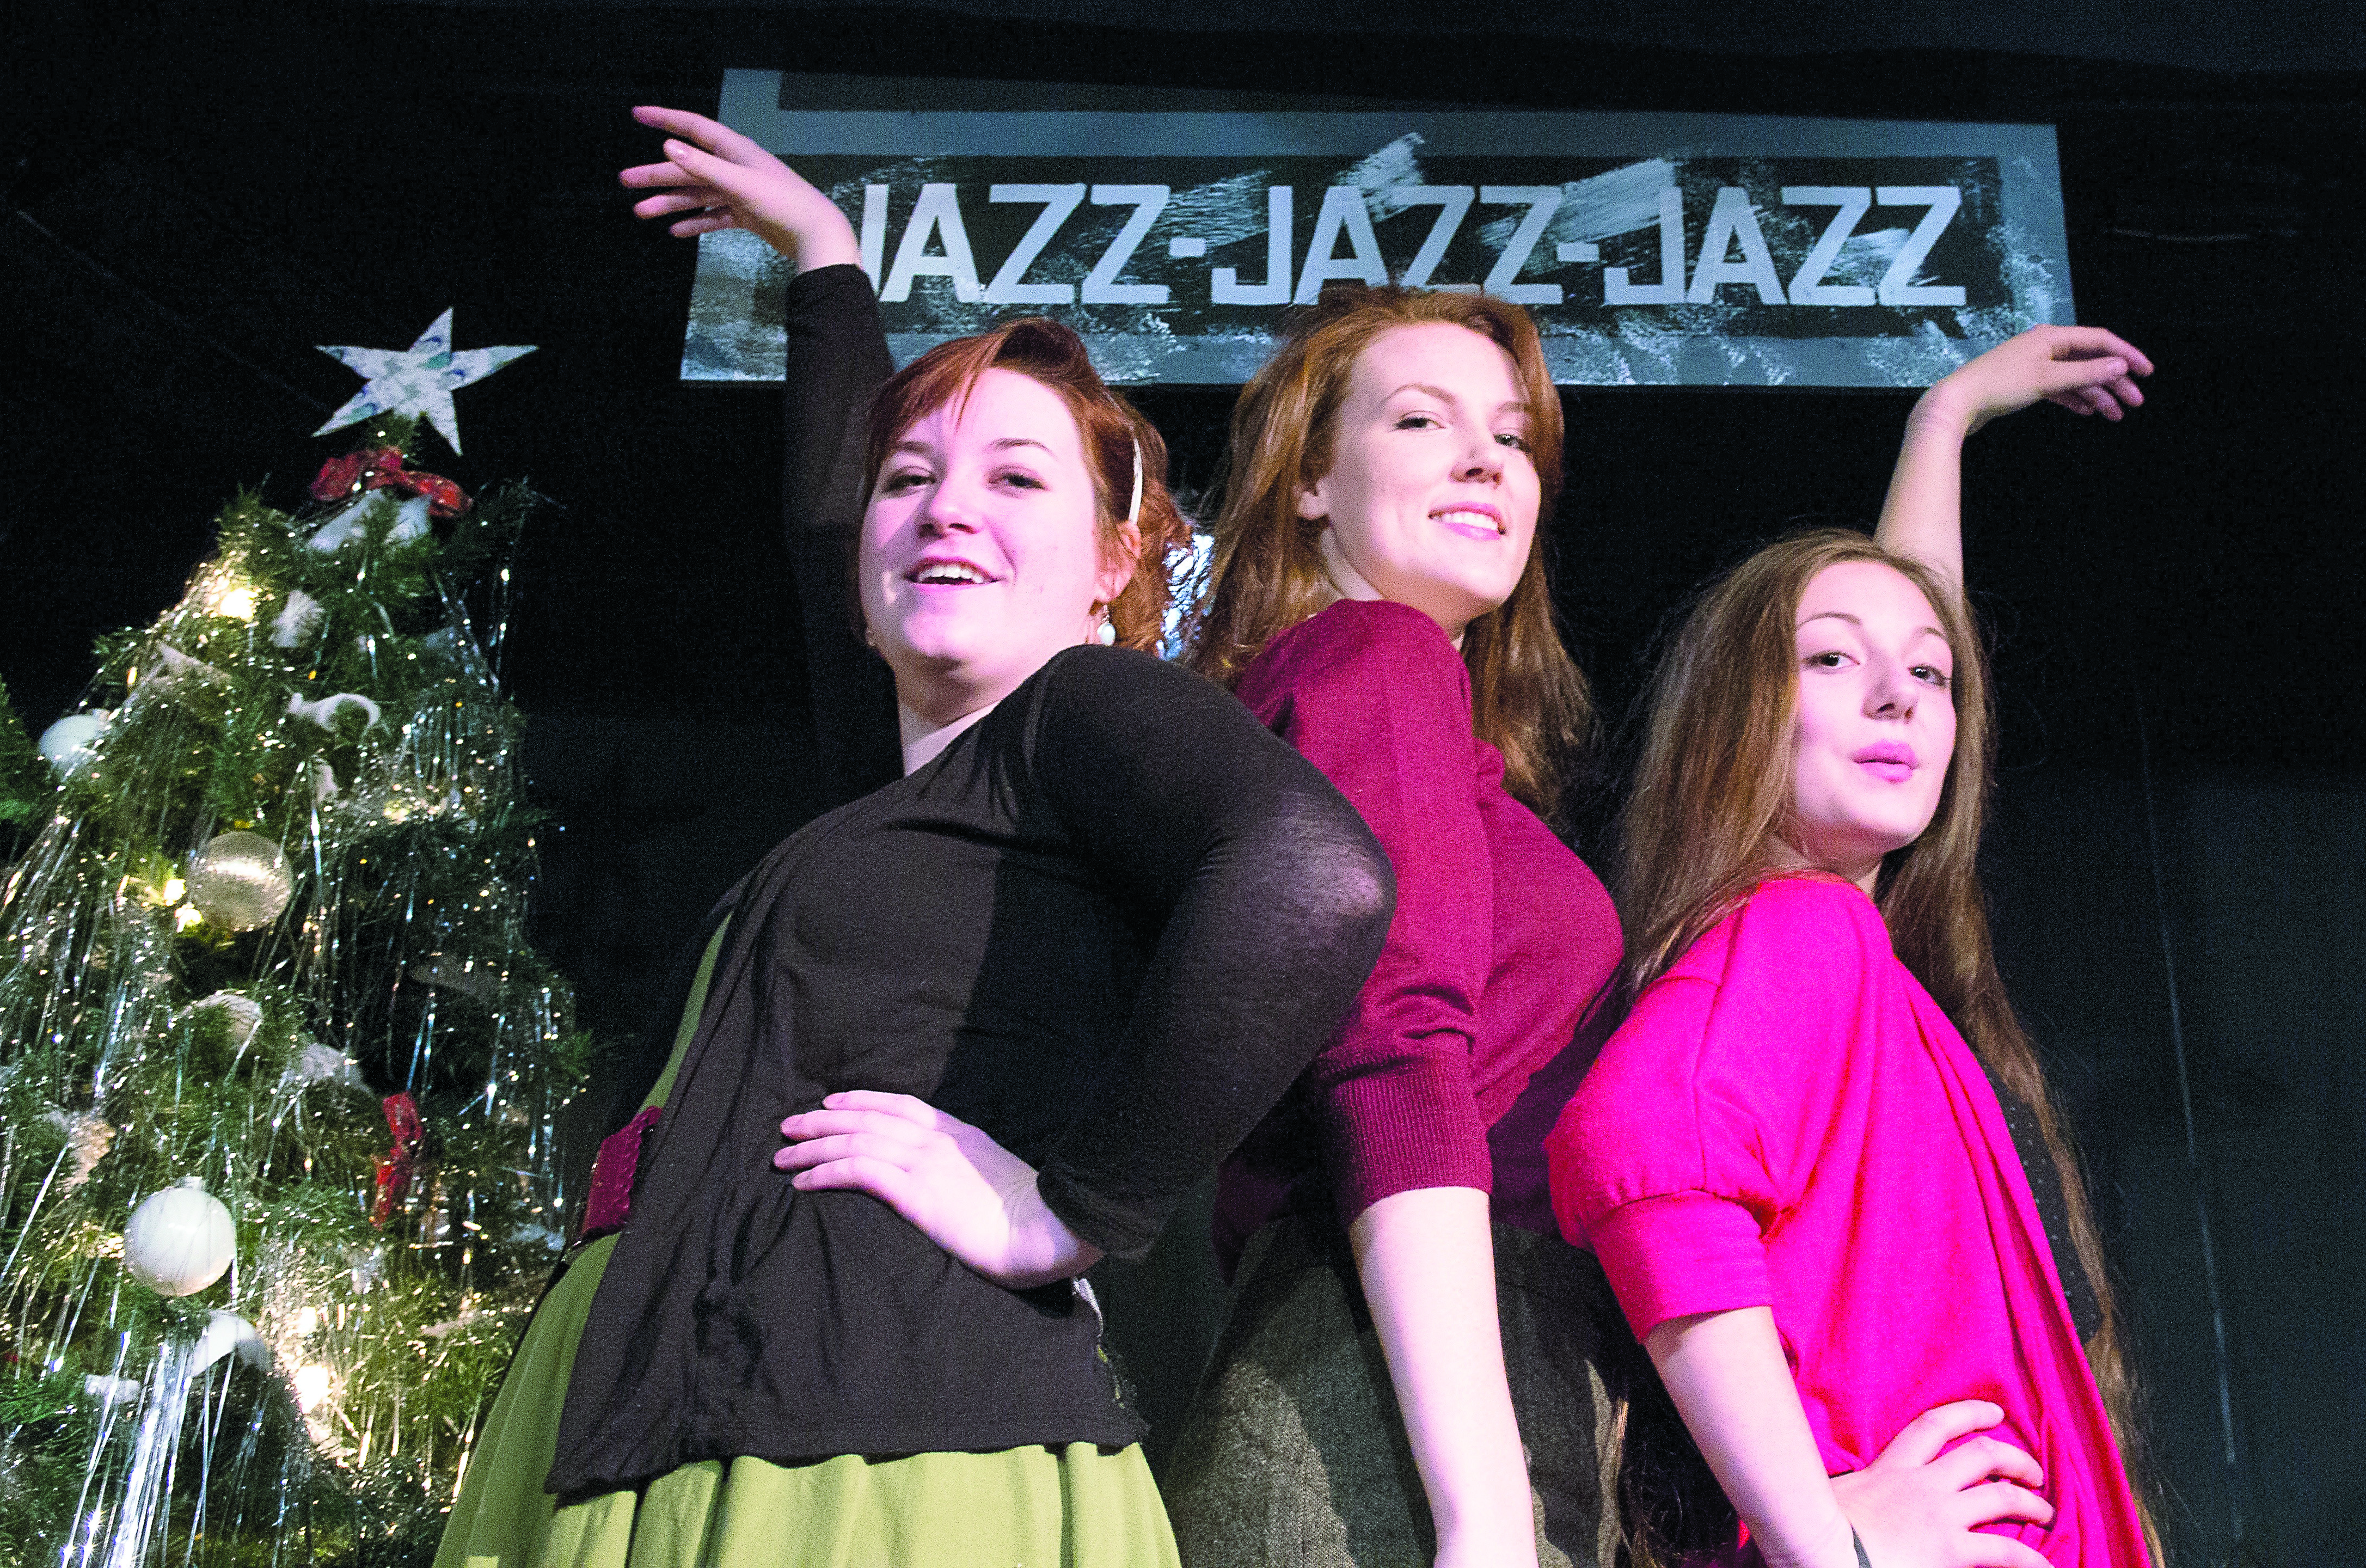 Fresh arrangements of holiday music come to Port Townsend's Key City Playhouse from Dec. 26-31. The cast includes